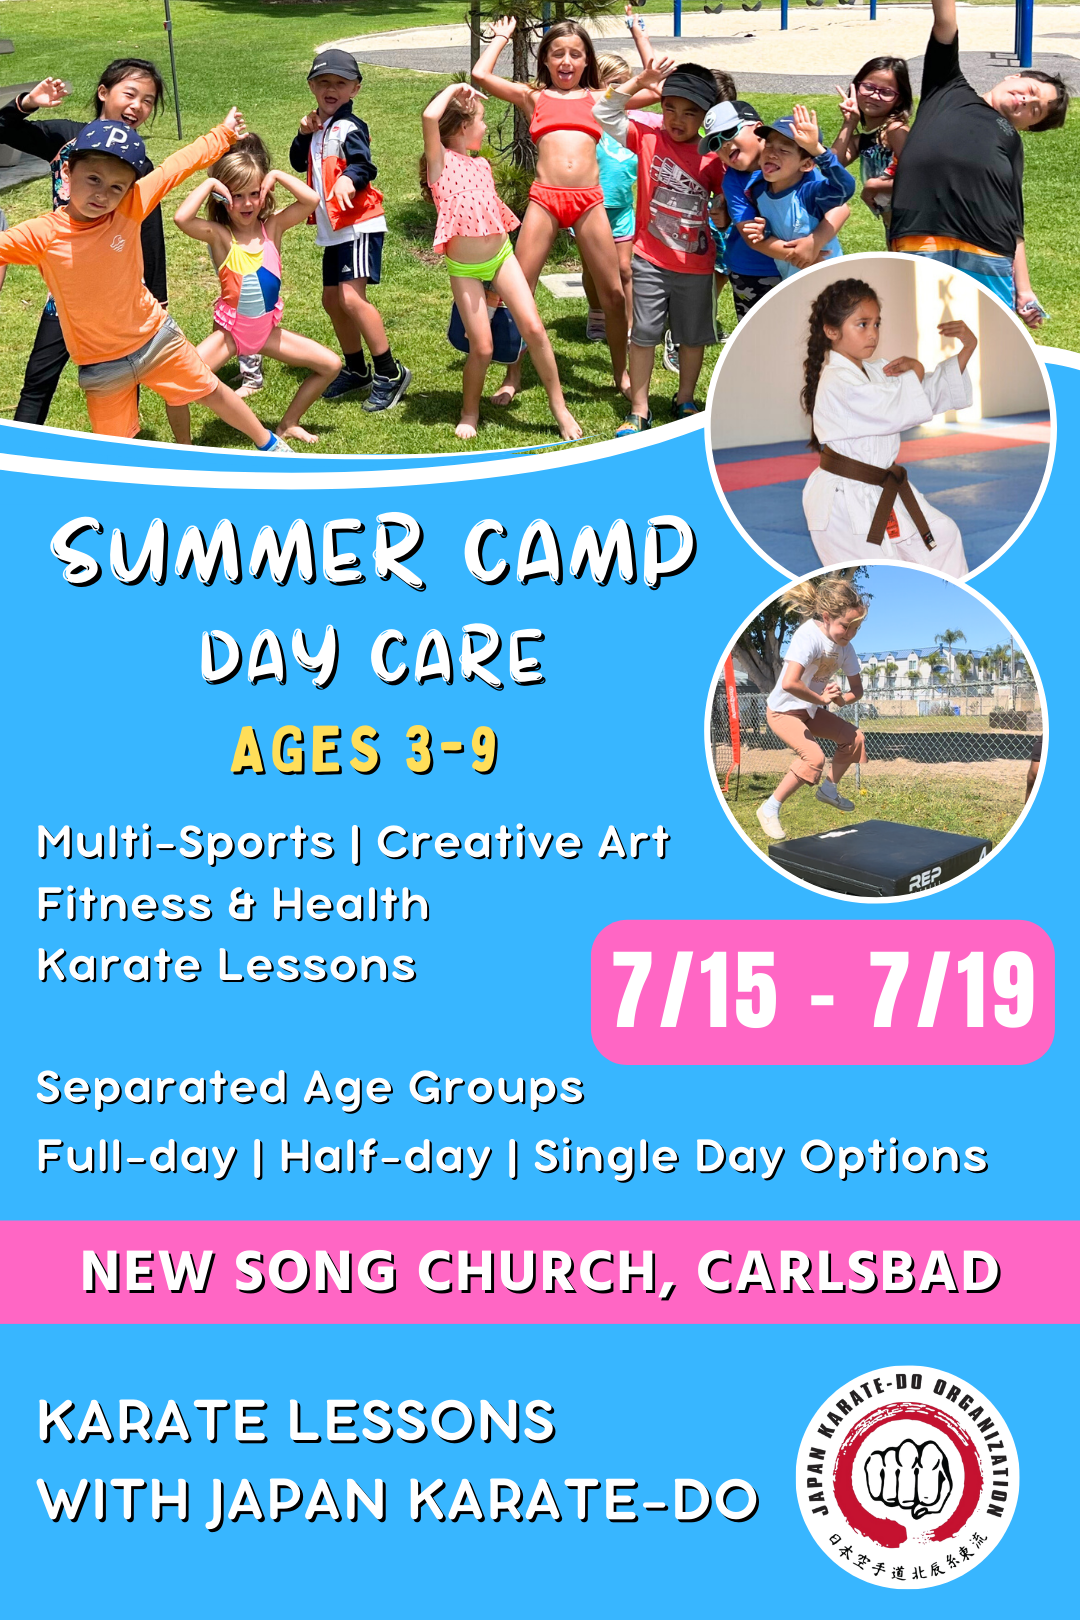 7/15 - 7/19 | Mon - Fri | 8:30 - 4:00<br>Multi-Sports, Art, and Karate<br>New Song Church, Carlsbad<br>Ages 3-9 | Separated Age Groups